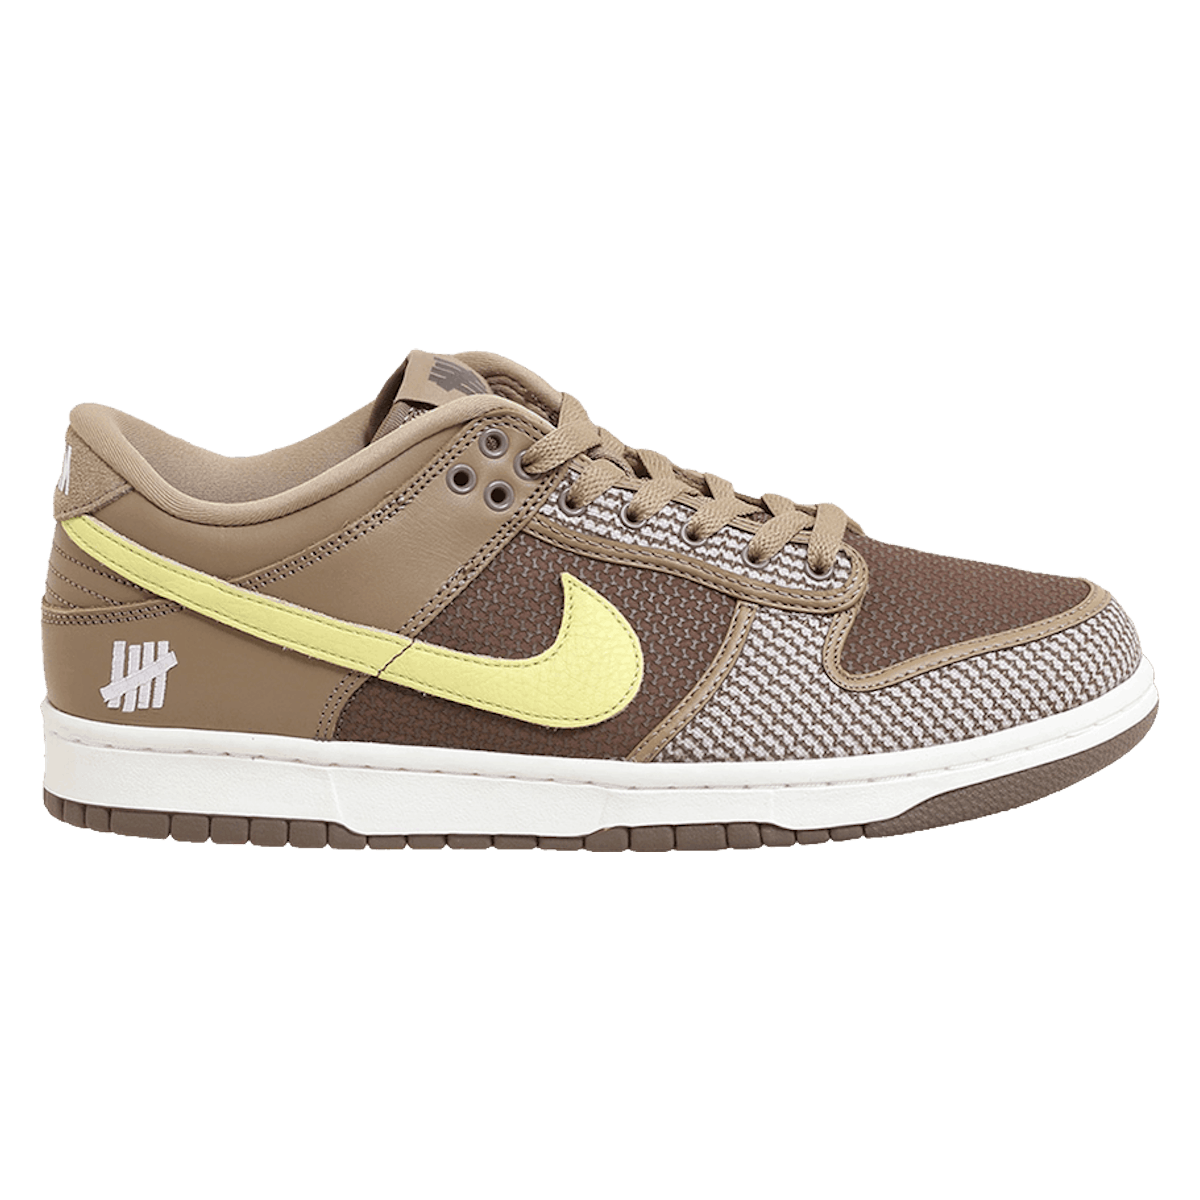 Undefeated x Nike Dunk Low SP "Canteen"